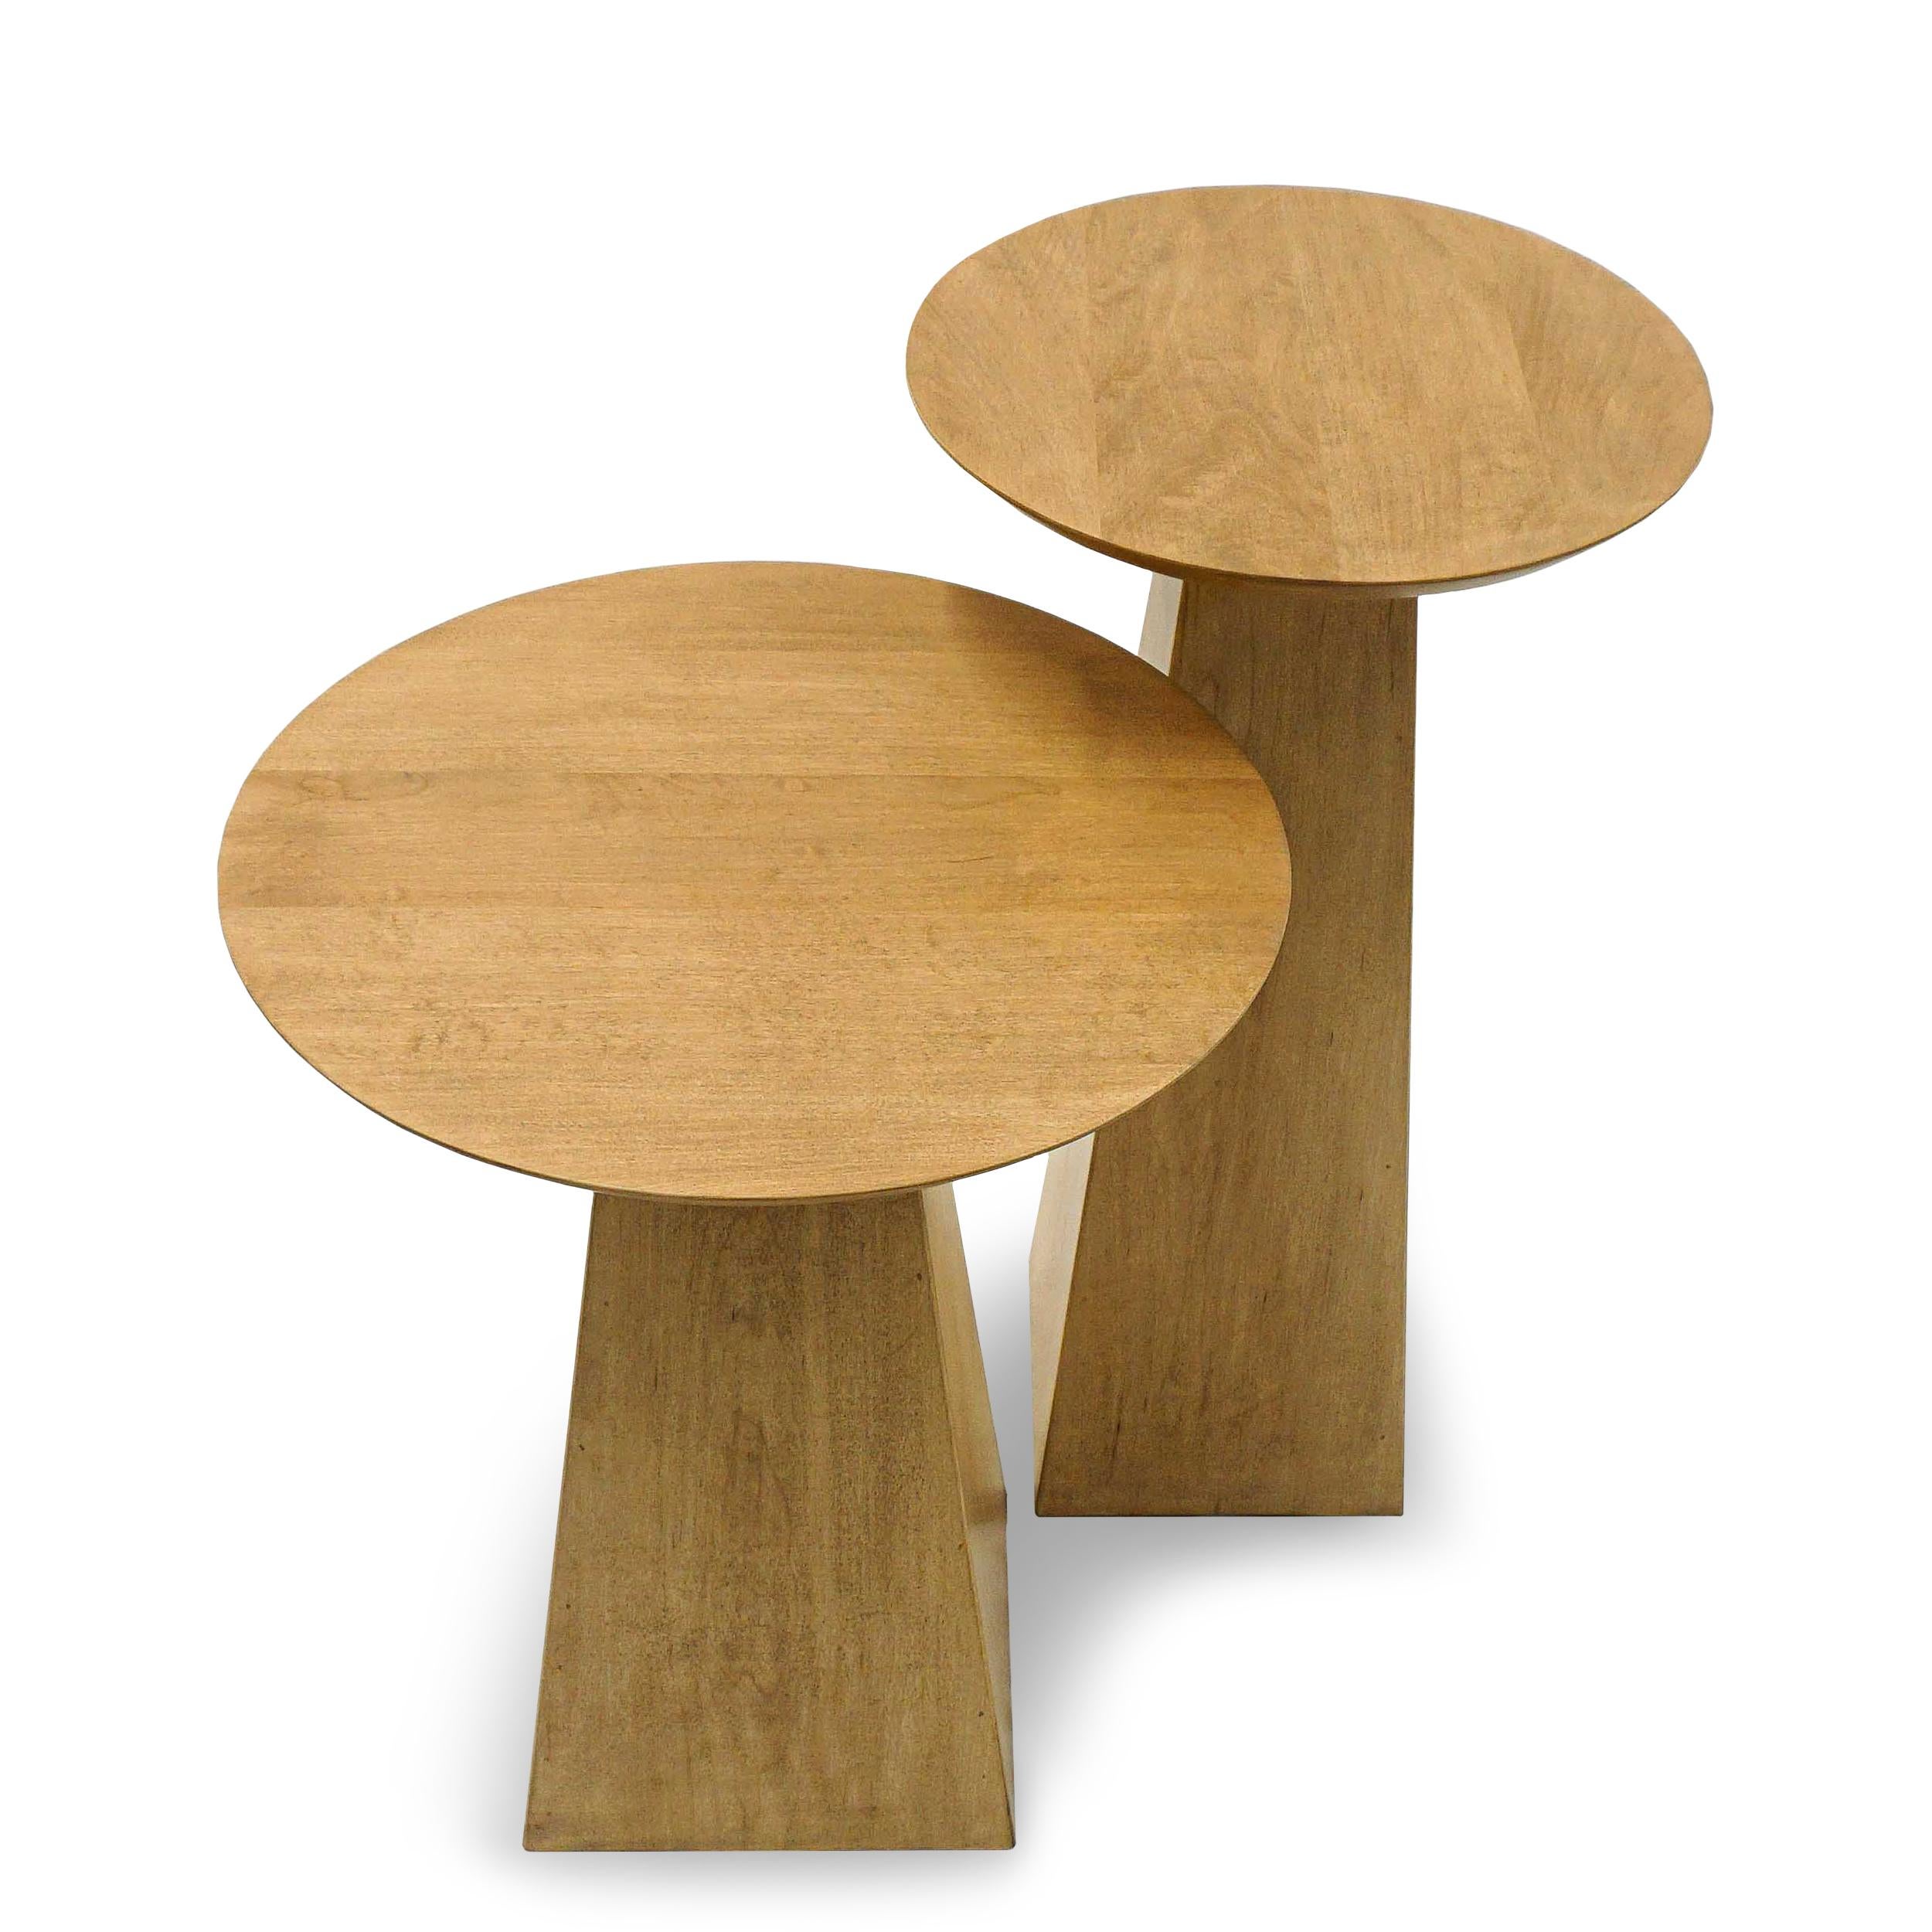 Geometric solid hard maple cocktail side tables set. Shown in natural finish stain. Customizable in size and wood finish. Ask about purchasing individually or in other quantities. 

Measurements:
Large 13” W x 13” D x 23.75” H
Tall 16” W x 16” D x